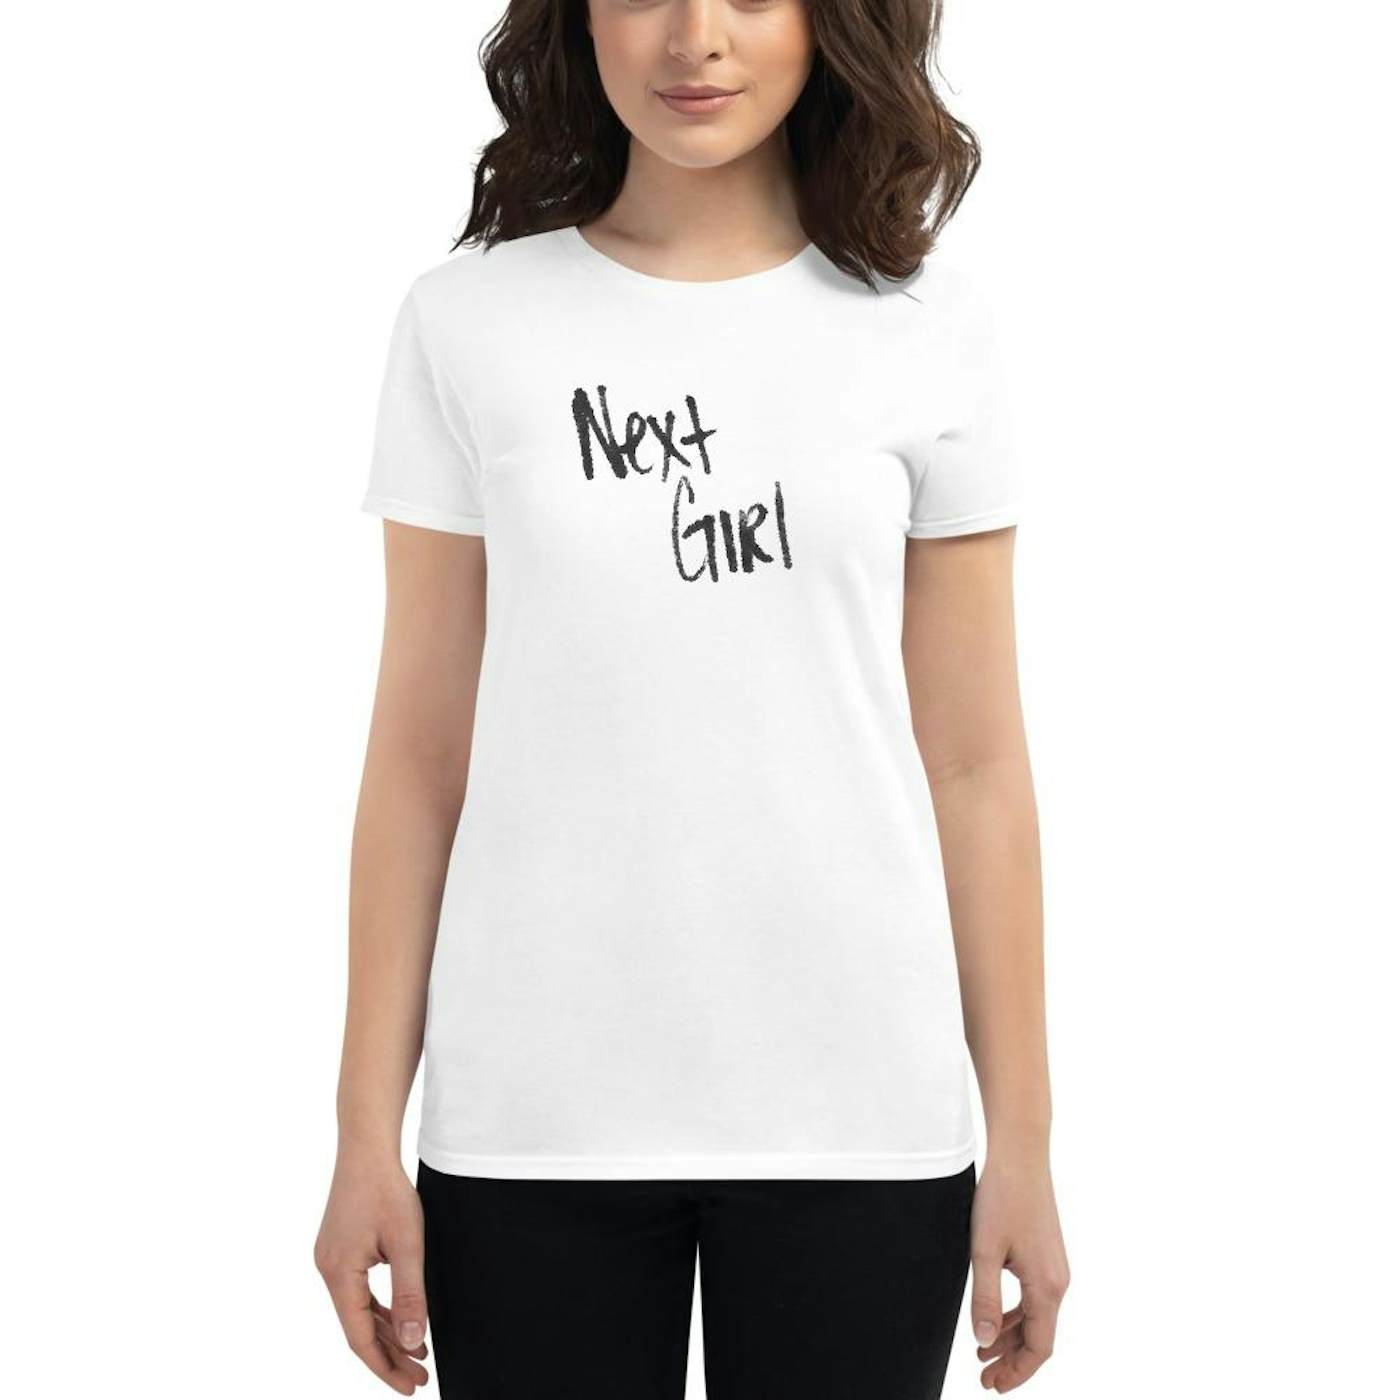 Carly Pearce - Next Girl - Fitted Short Sleeve T-Shirt